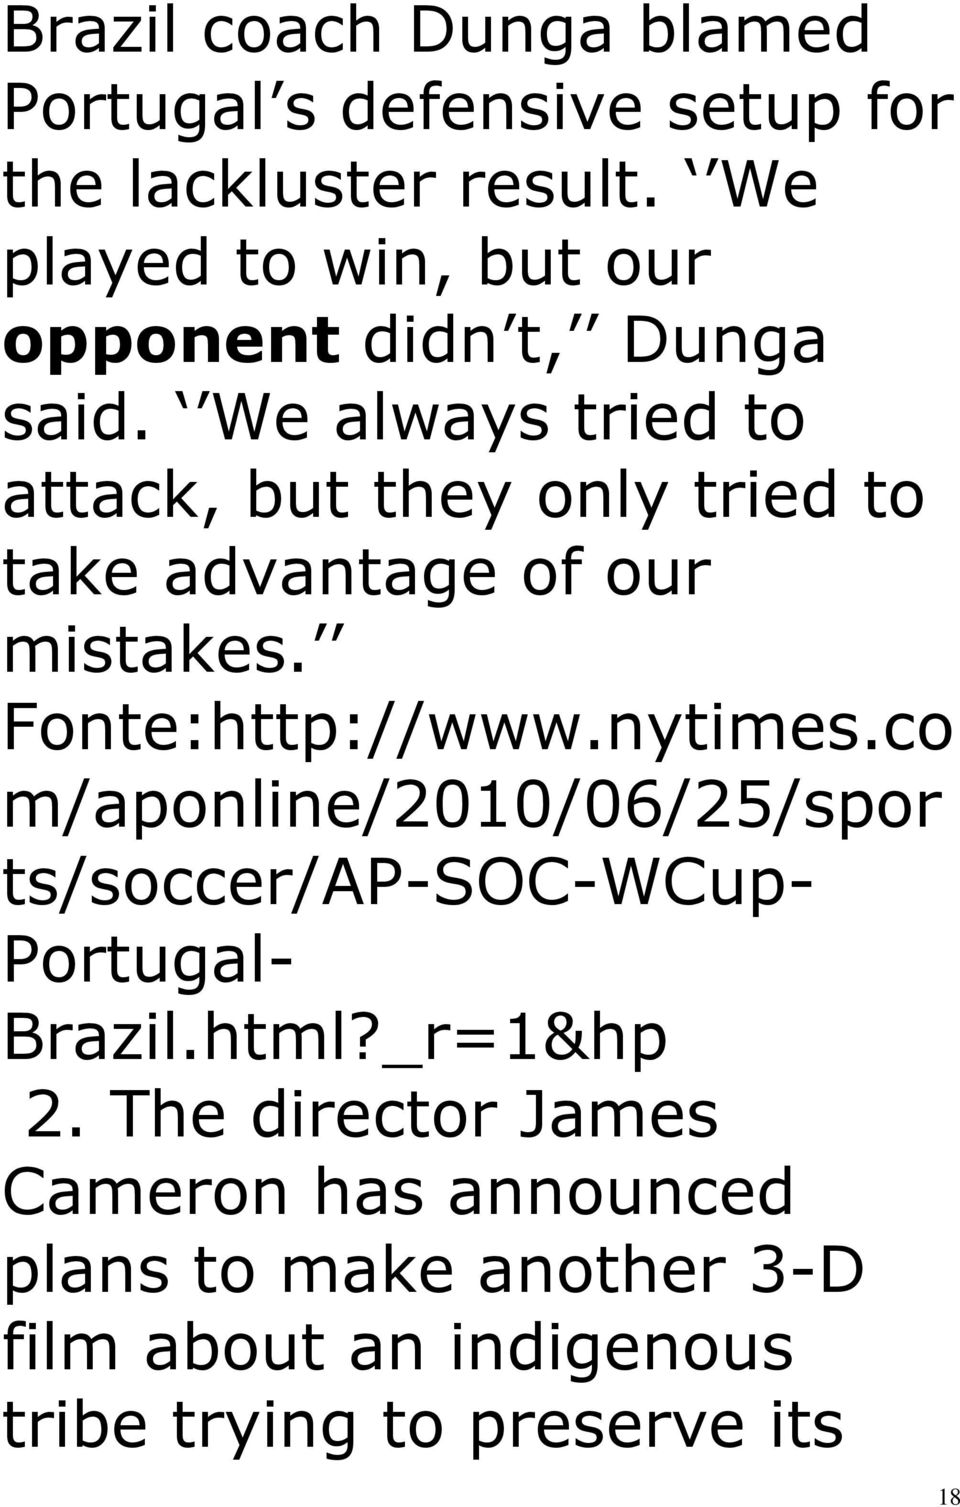 We always tried to attack, but they only tried to take advantage of our mistakes. Fonte:http://www.nytimes.